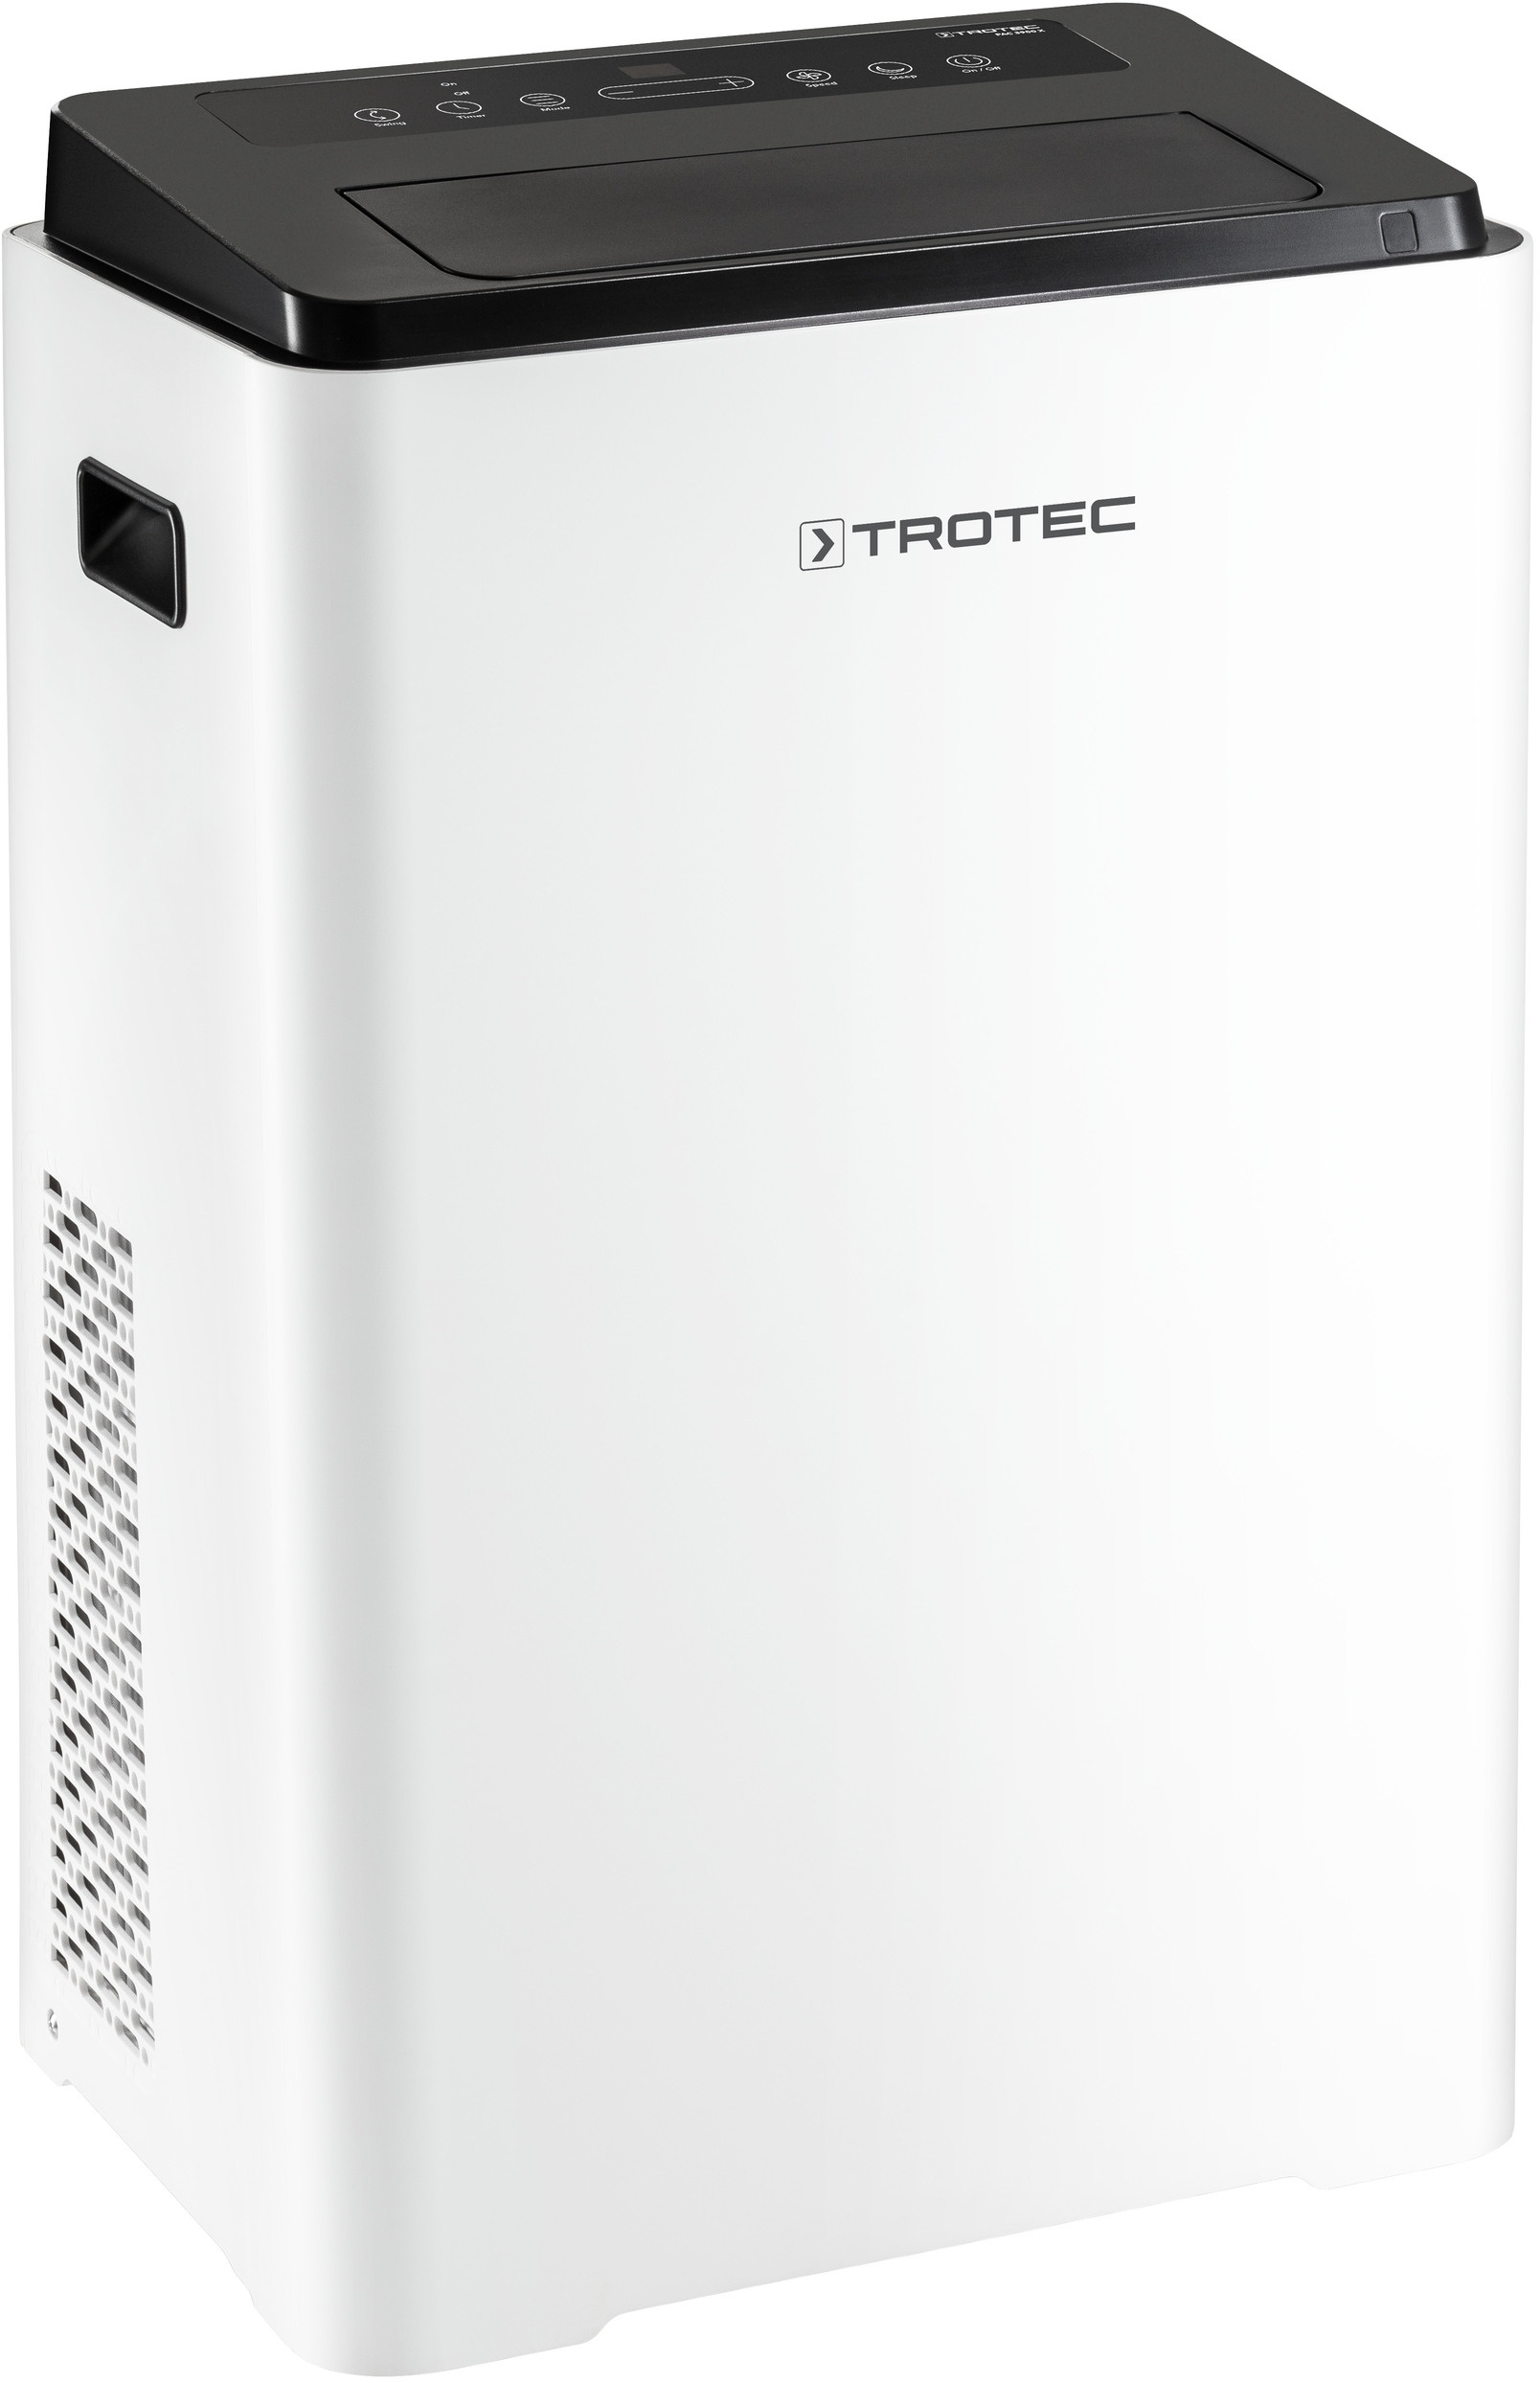 Trotec Lokale Airconditioner PAC 3900 X